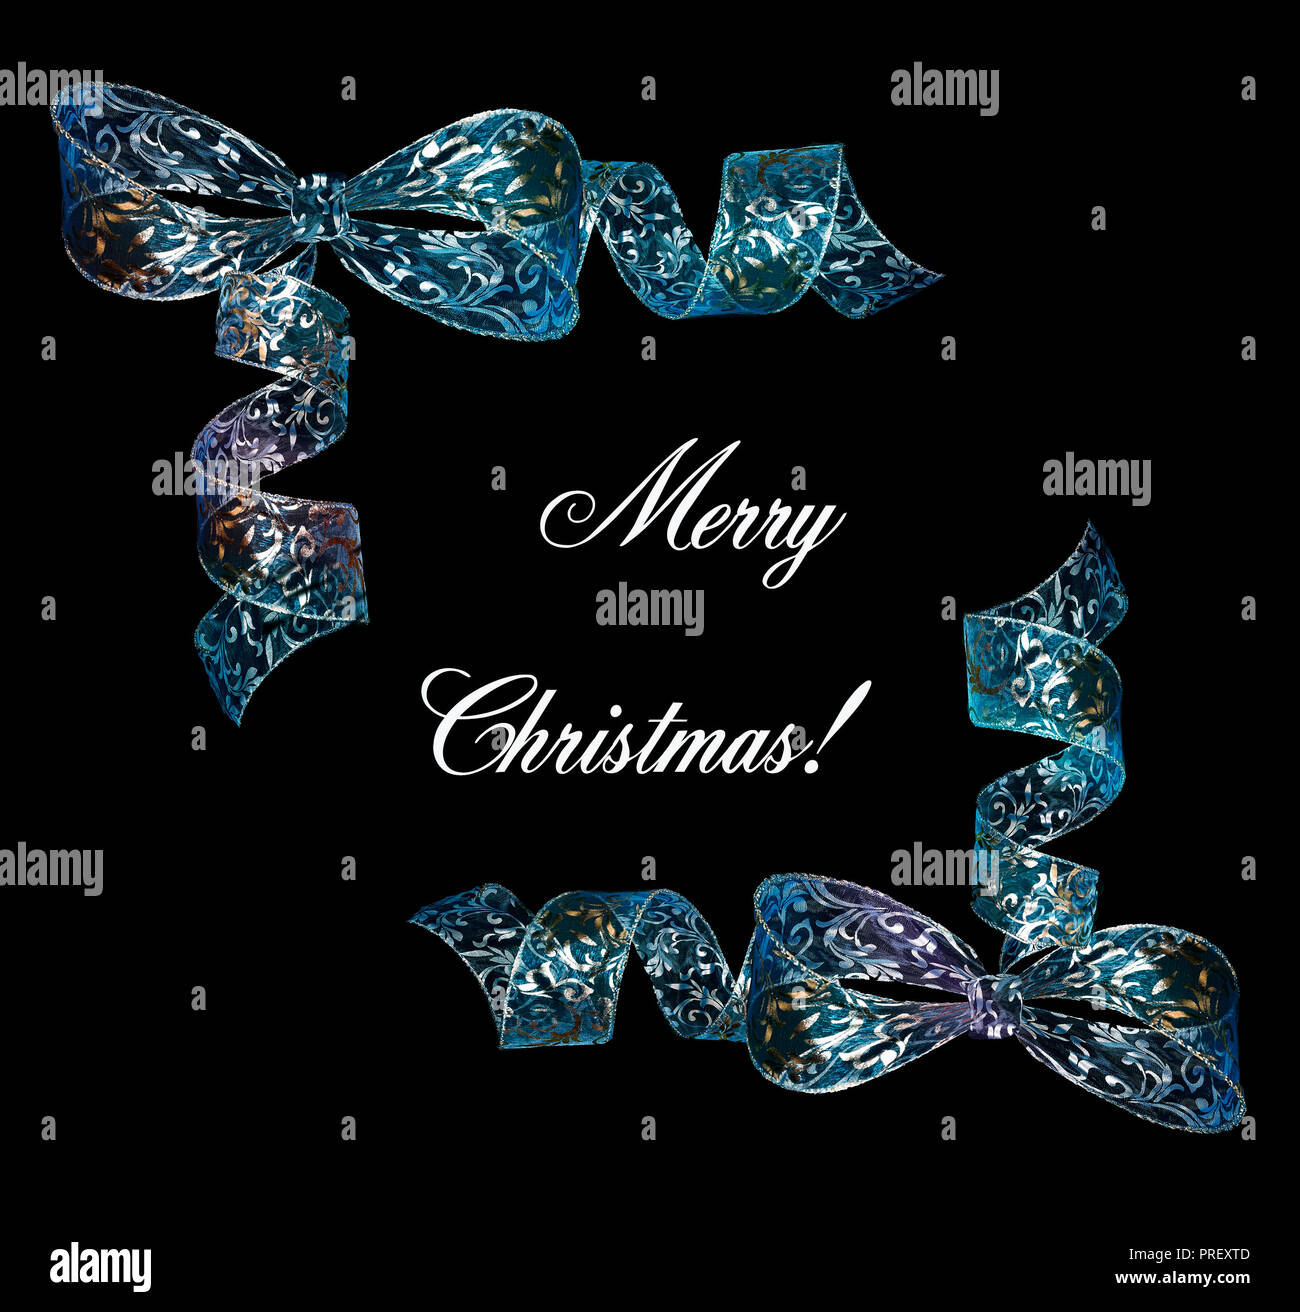 Elegant Christmas background or frame with silver-blue shining bows and white text Merry Christmas on black backdrop Stock Photo